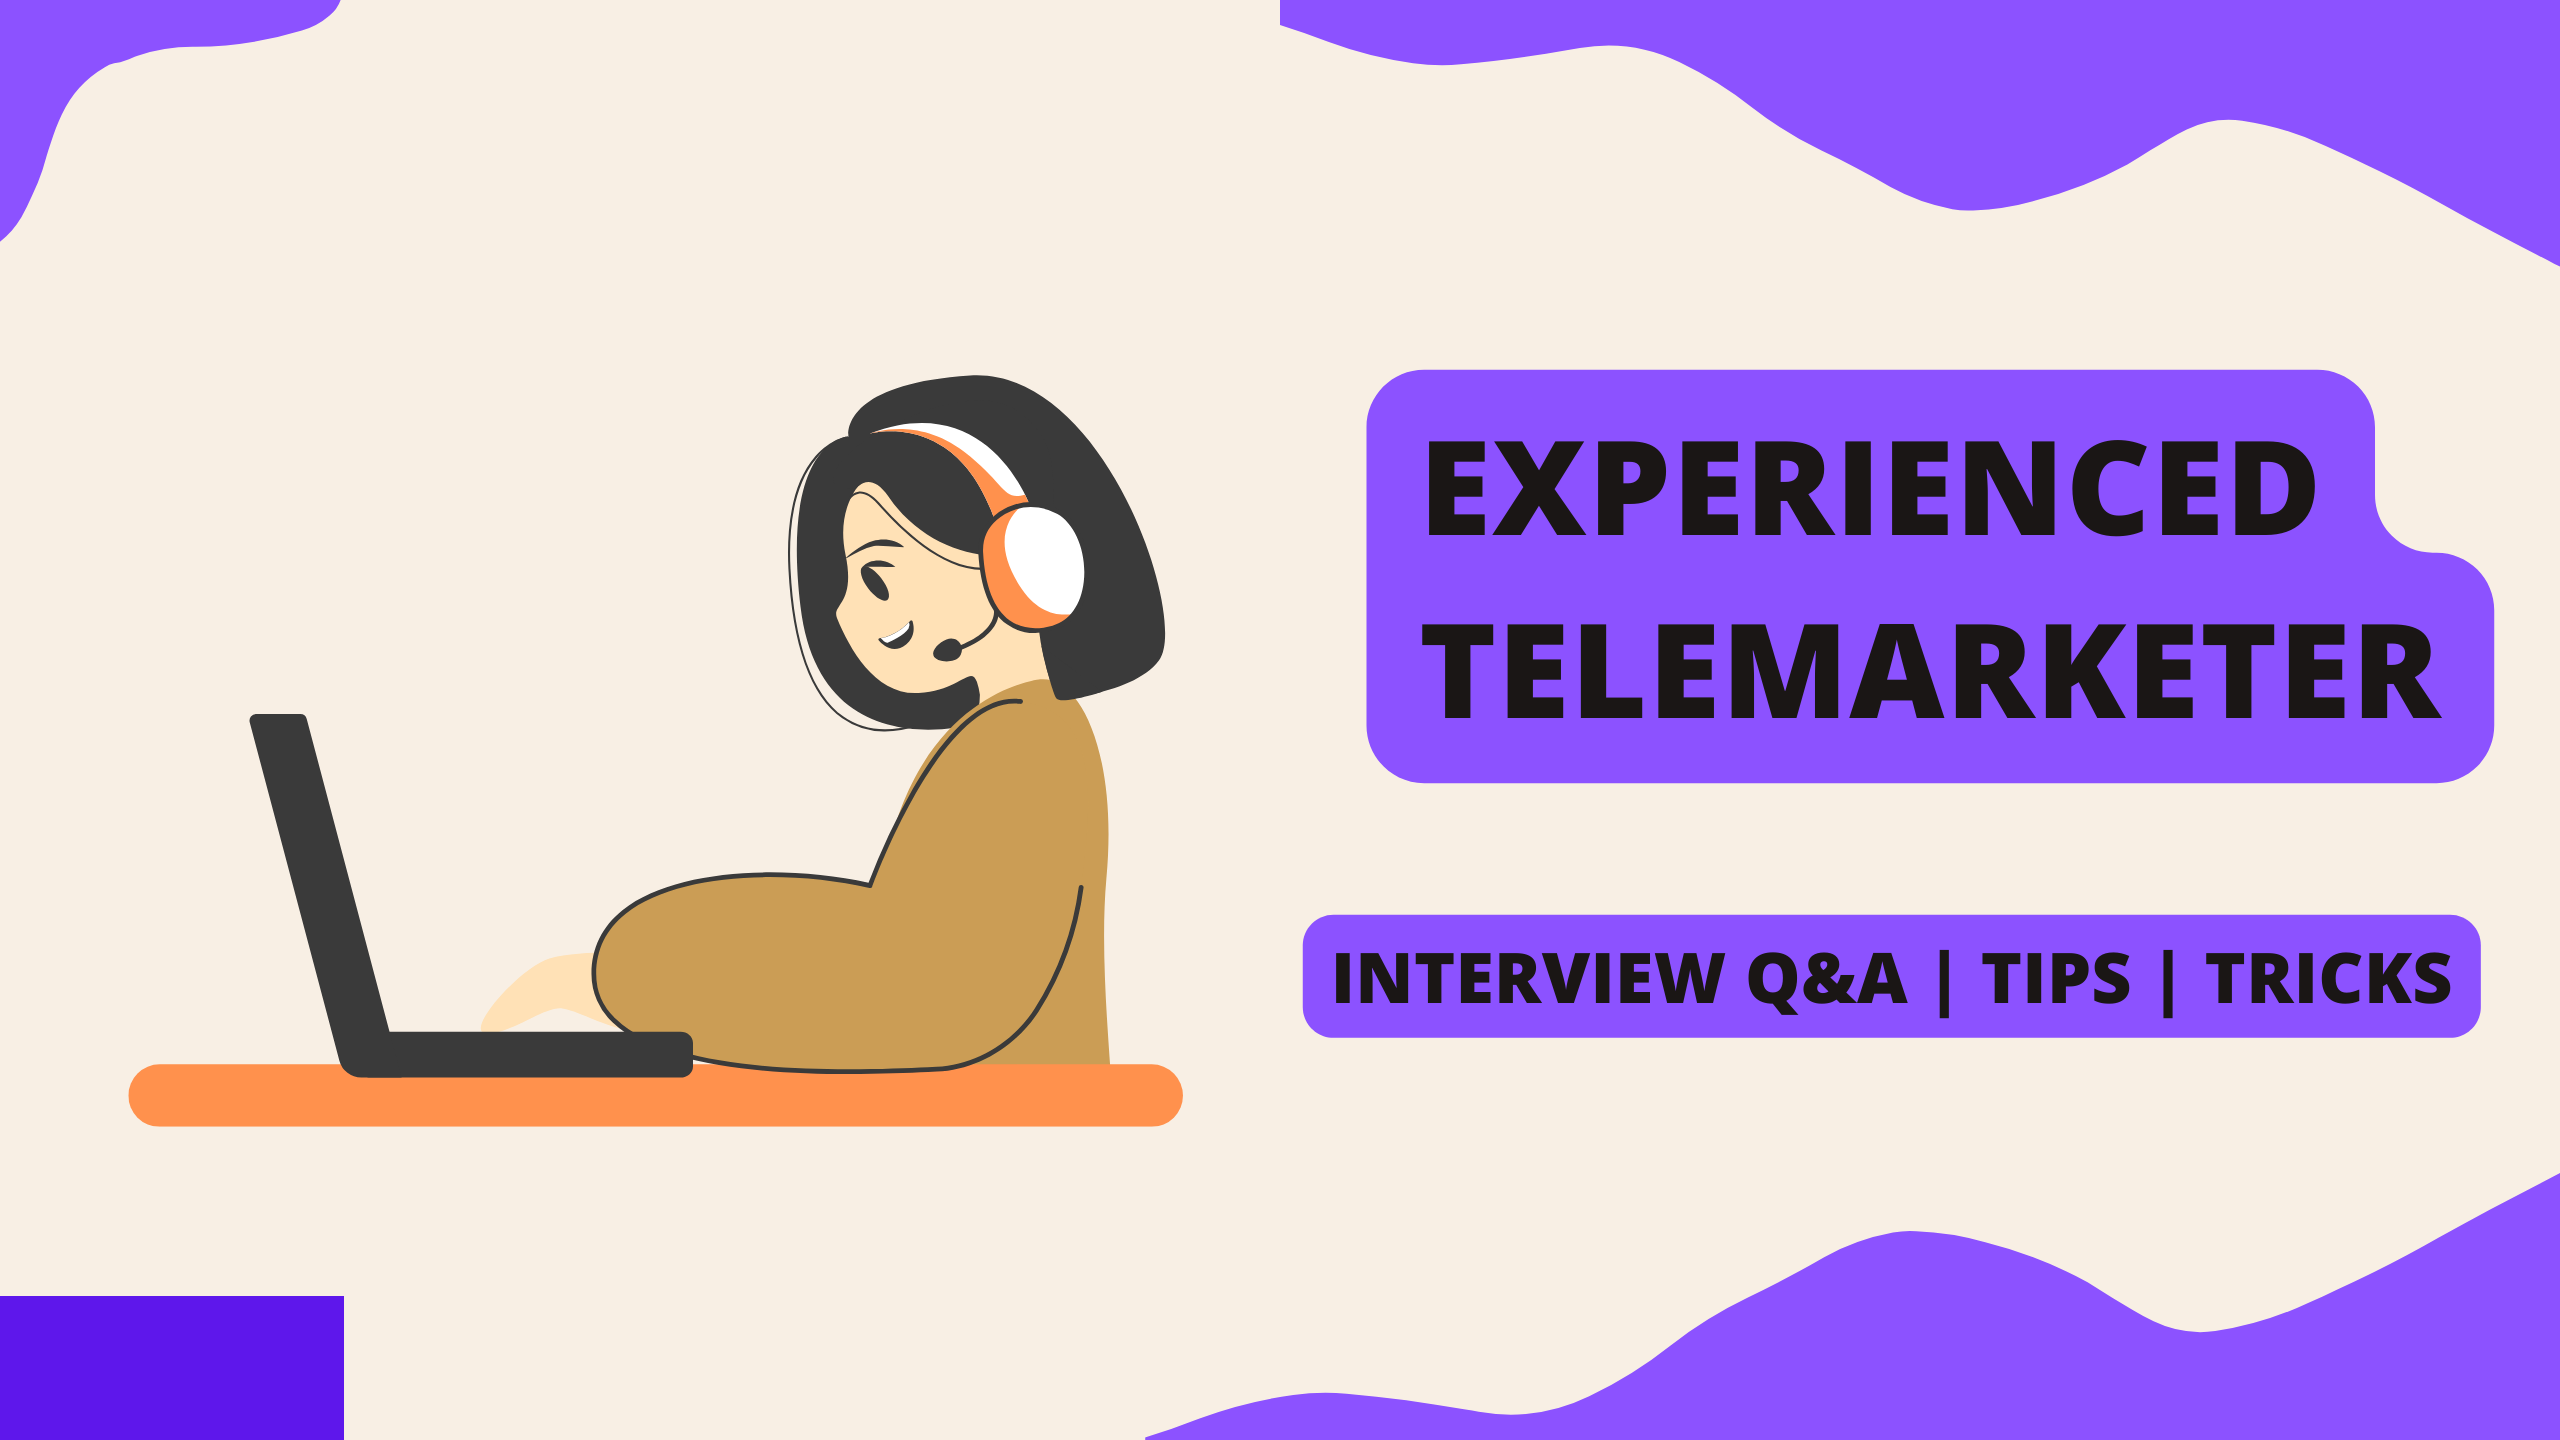 Guide to the Experienced Telemarketer Interview in South Africa